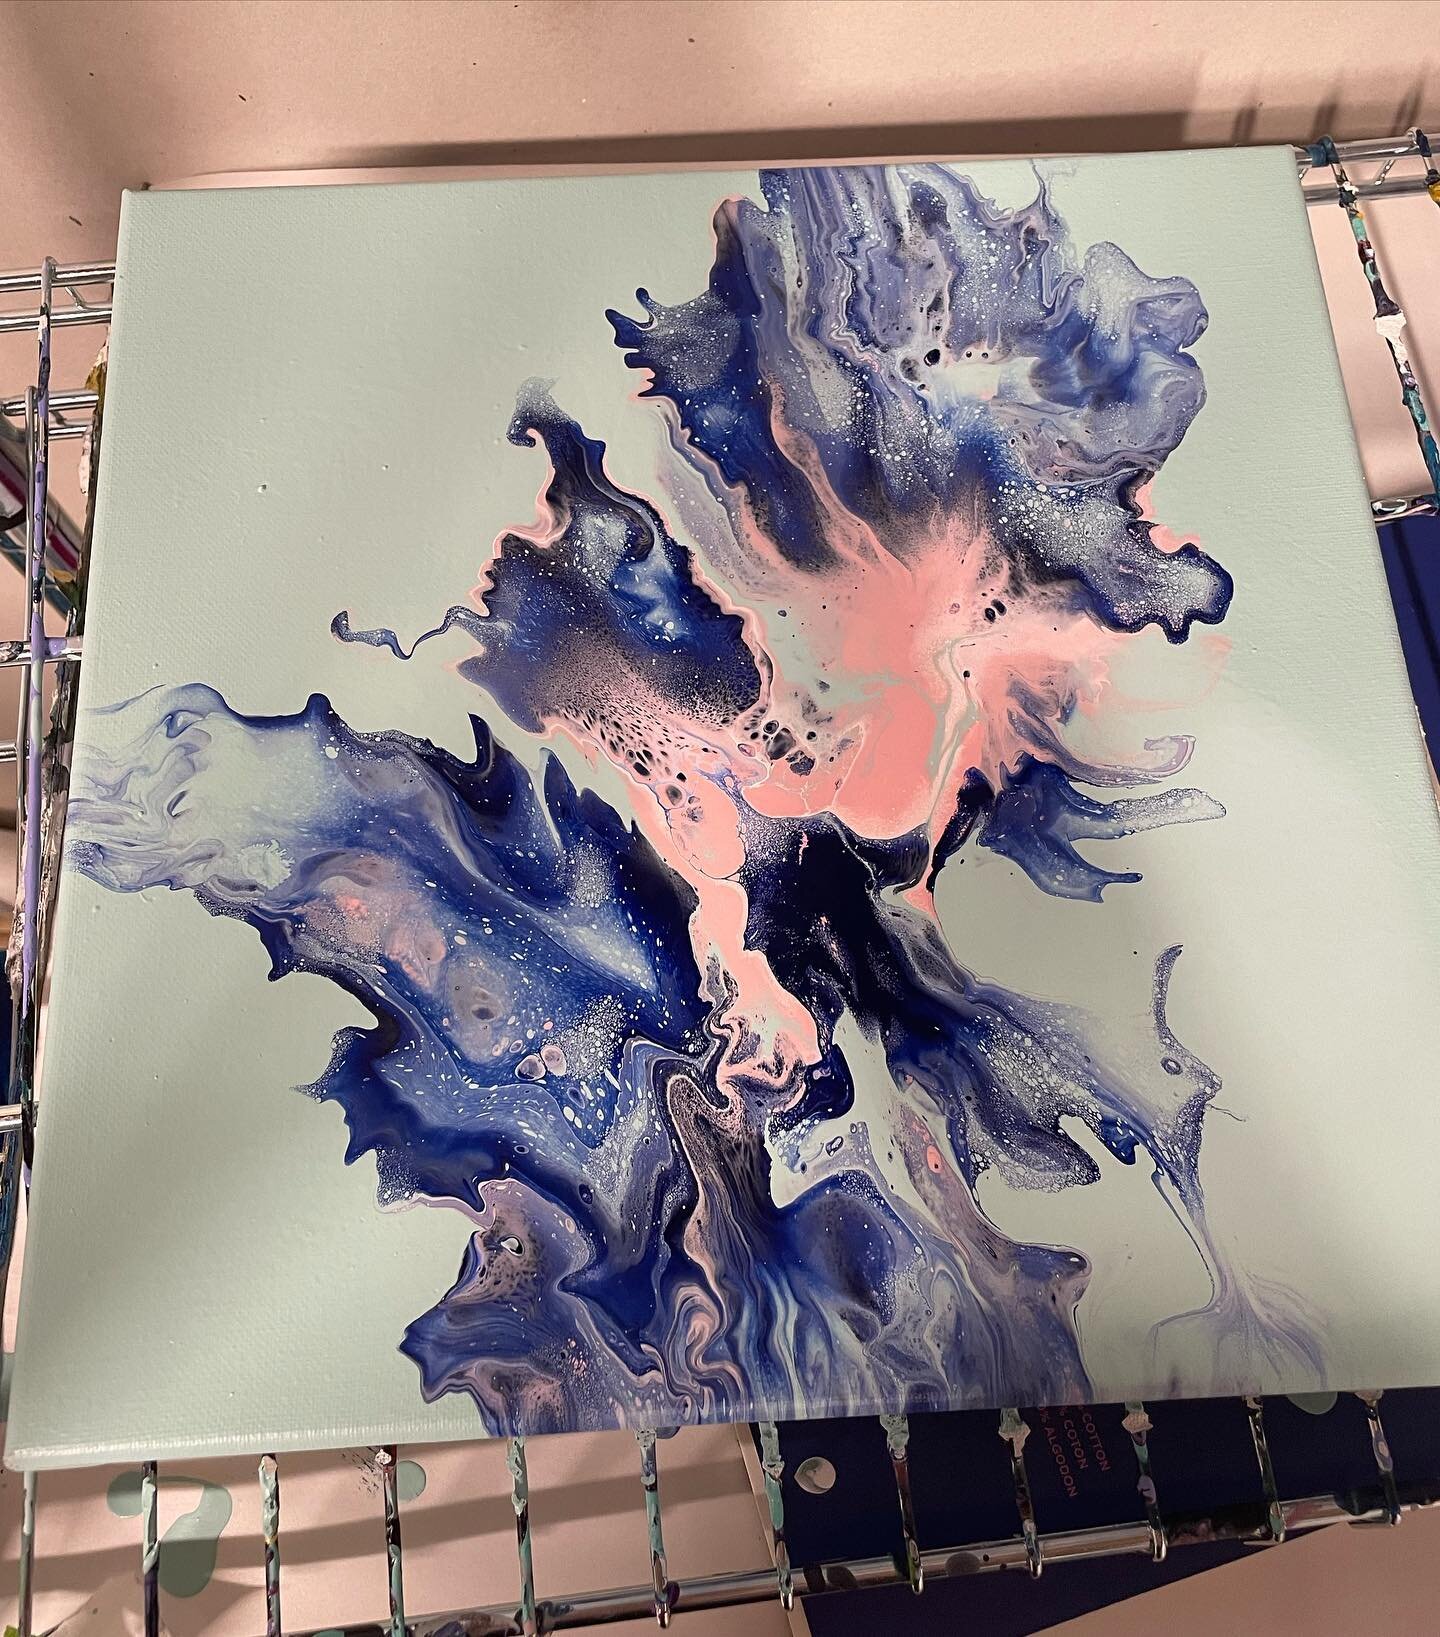 Some new stuff that you&rsquo;ll see at the #worthingtonartsfestival this weekend! Come see me and support other local artists! ❤️

pourpainting #acrylicpouring #fluidart #artistsoninstagram #artistsofinstagram #abstractart #acrylicpainting #614life 